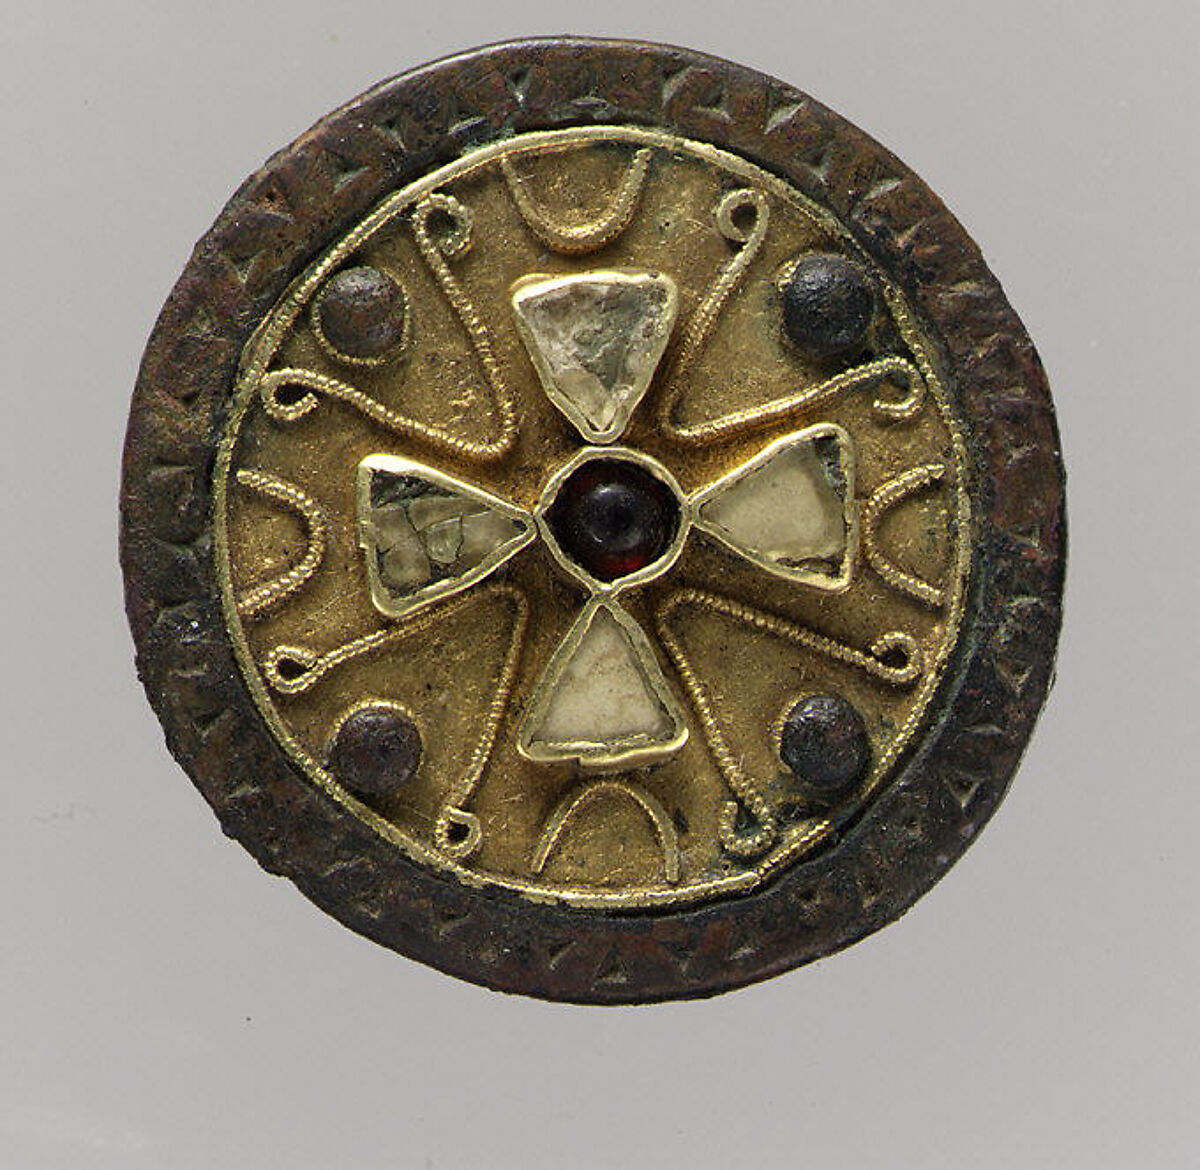 Disk Brooch, Gold, wire, paste, paste cabochon or garnet, copper alloy rim and nail, Frankish 